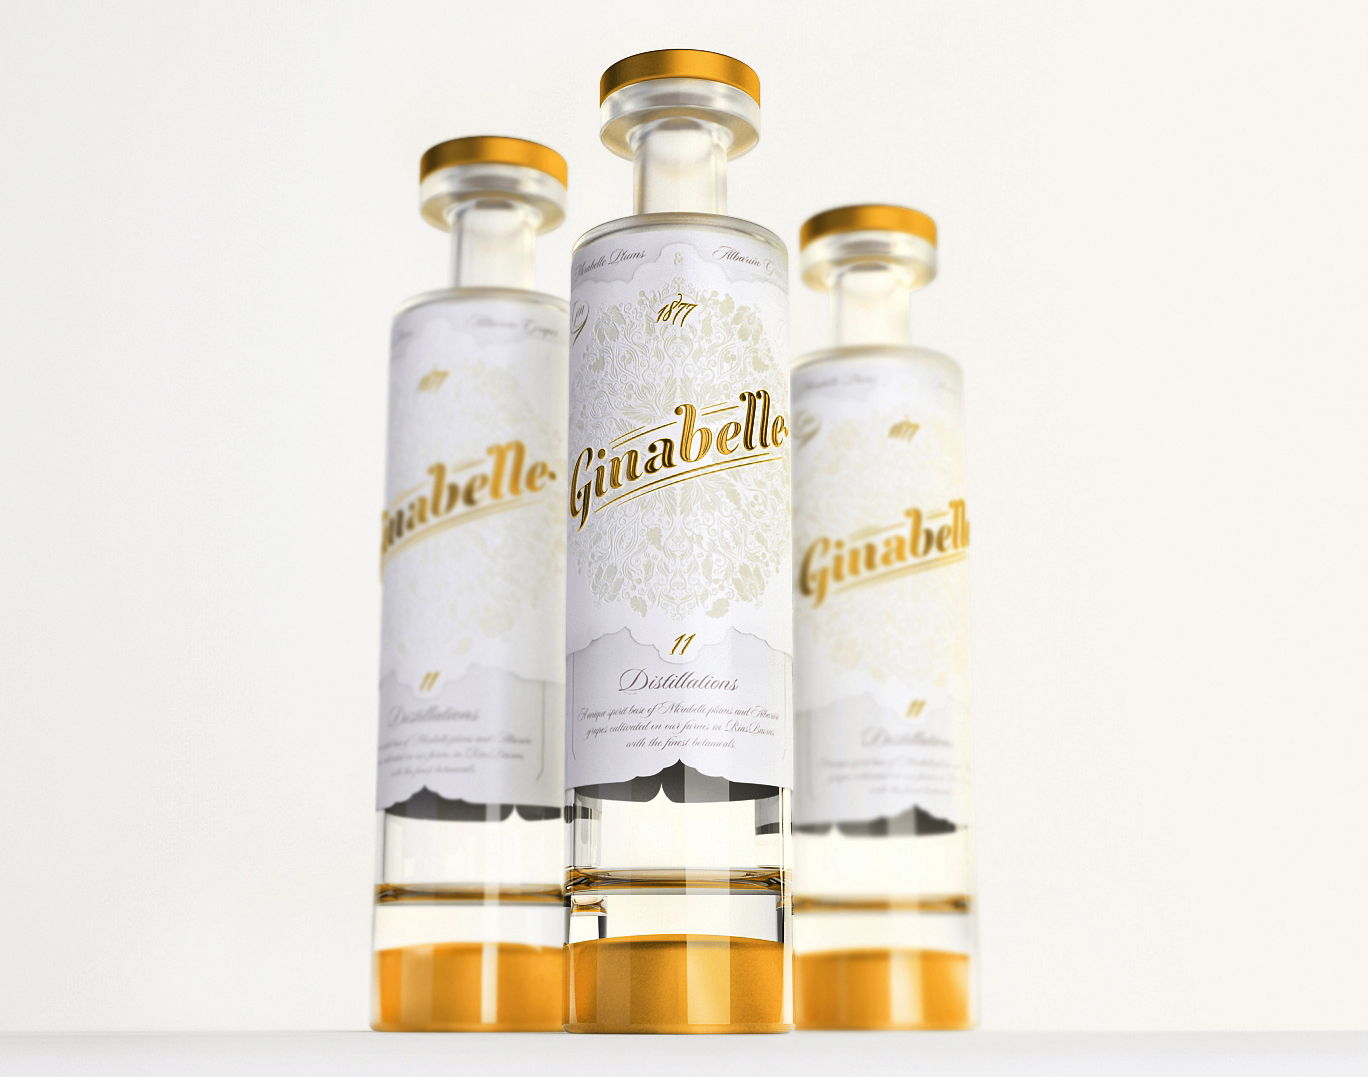 Have you seen the new ginabelle?